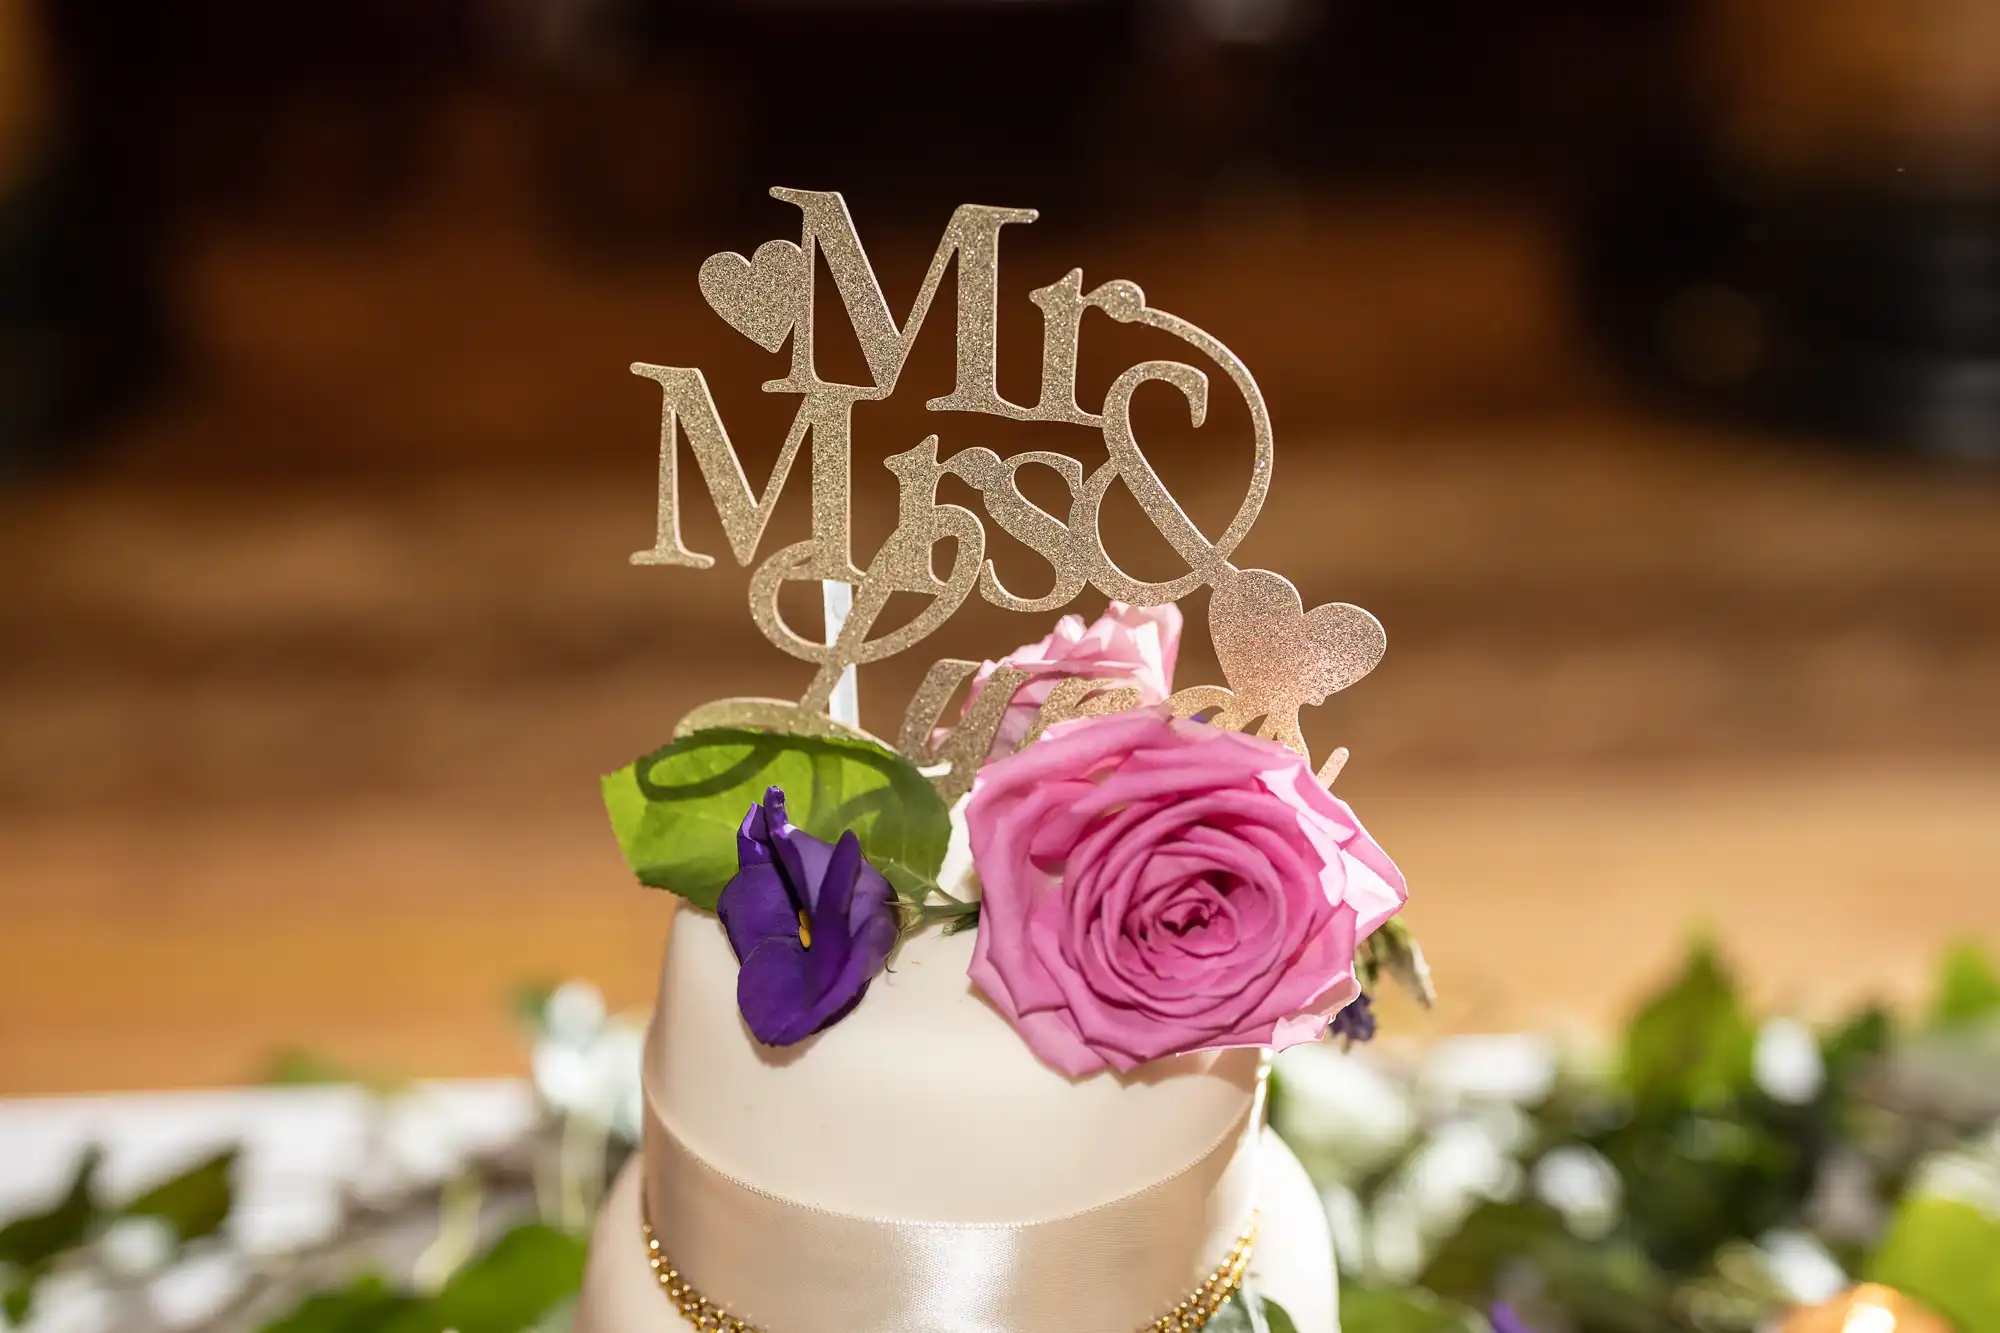 Close-up of a wedding cake topped with a "Mr & Mrs" decoration and adorned with pink and purple flowers.